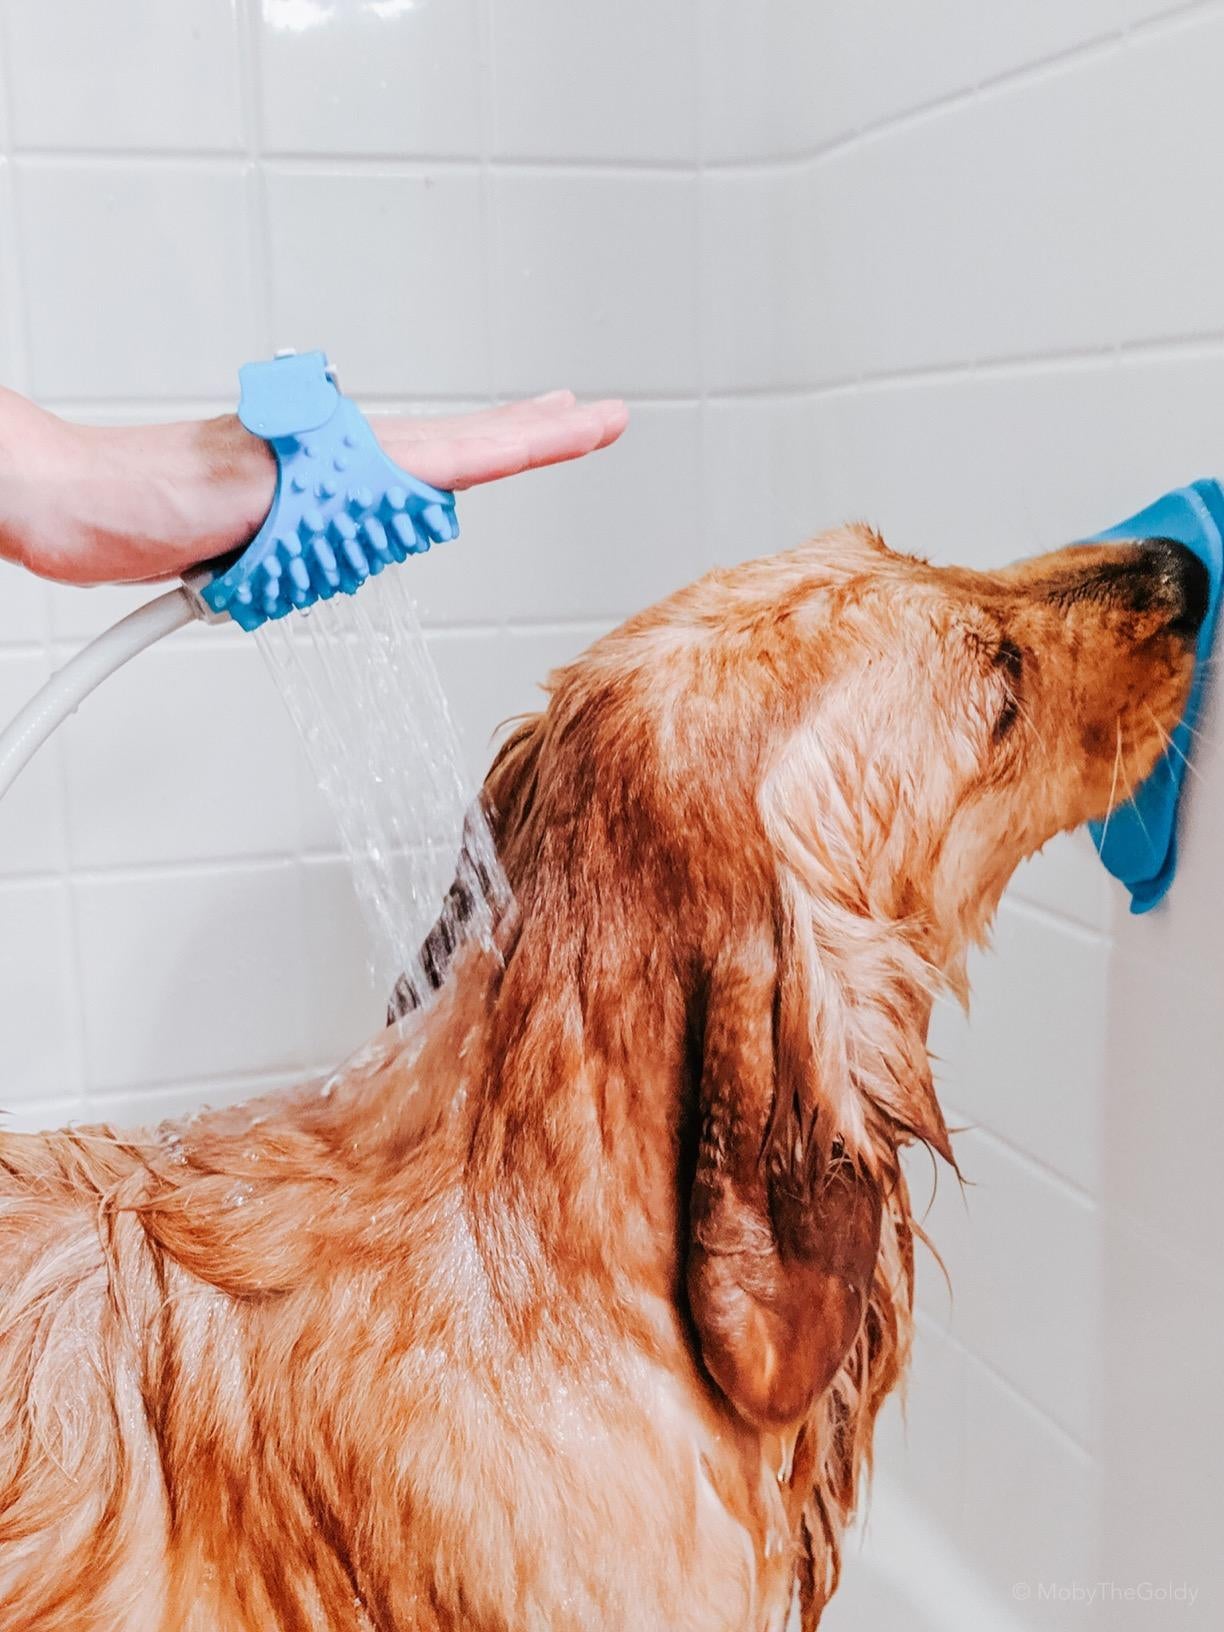 A reviewer bathing their dog with the sprayer, while the dog licks PB off a mat on the shower